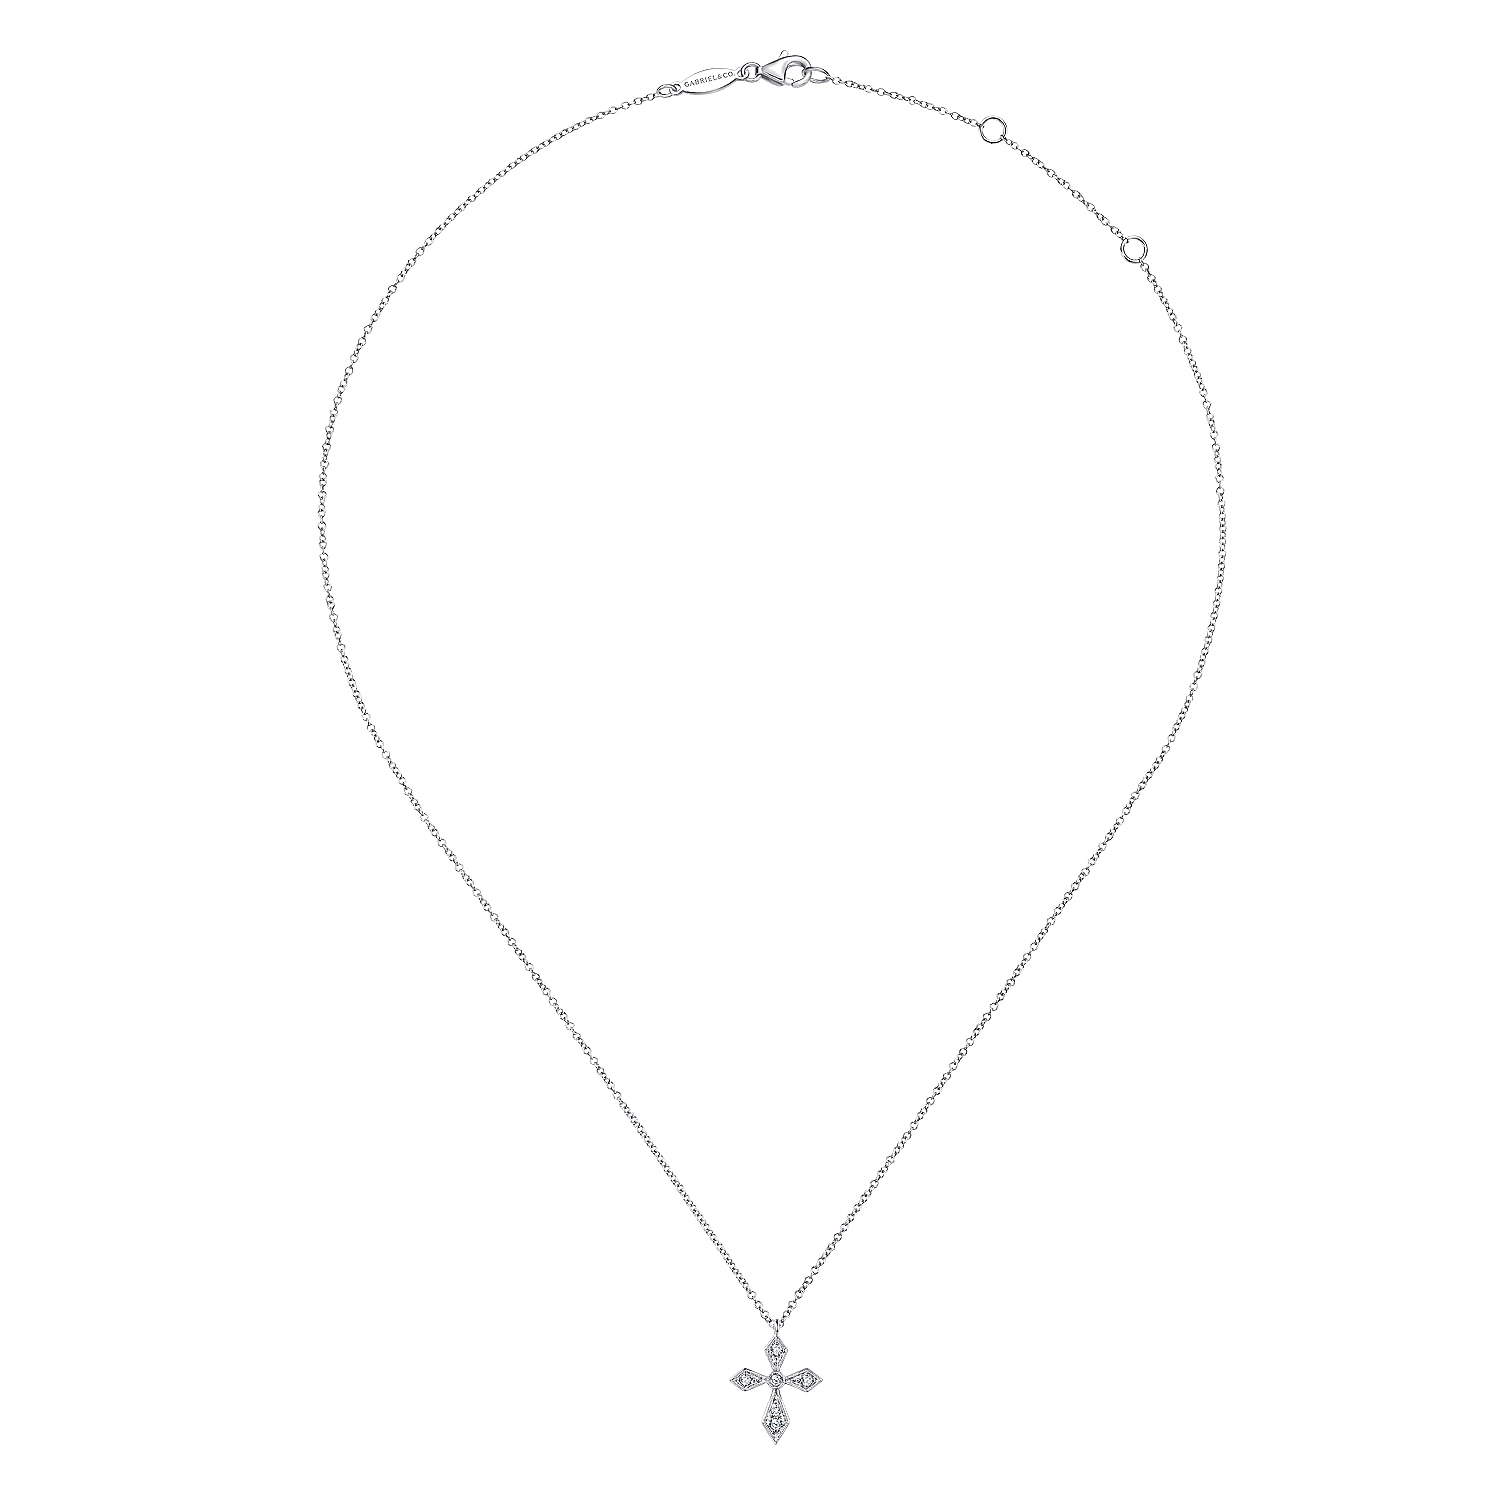 Vintage Inspired 14K White Gold Pointed Diamond Cross Pendant Necklace - 0.08 ct - Shot 2